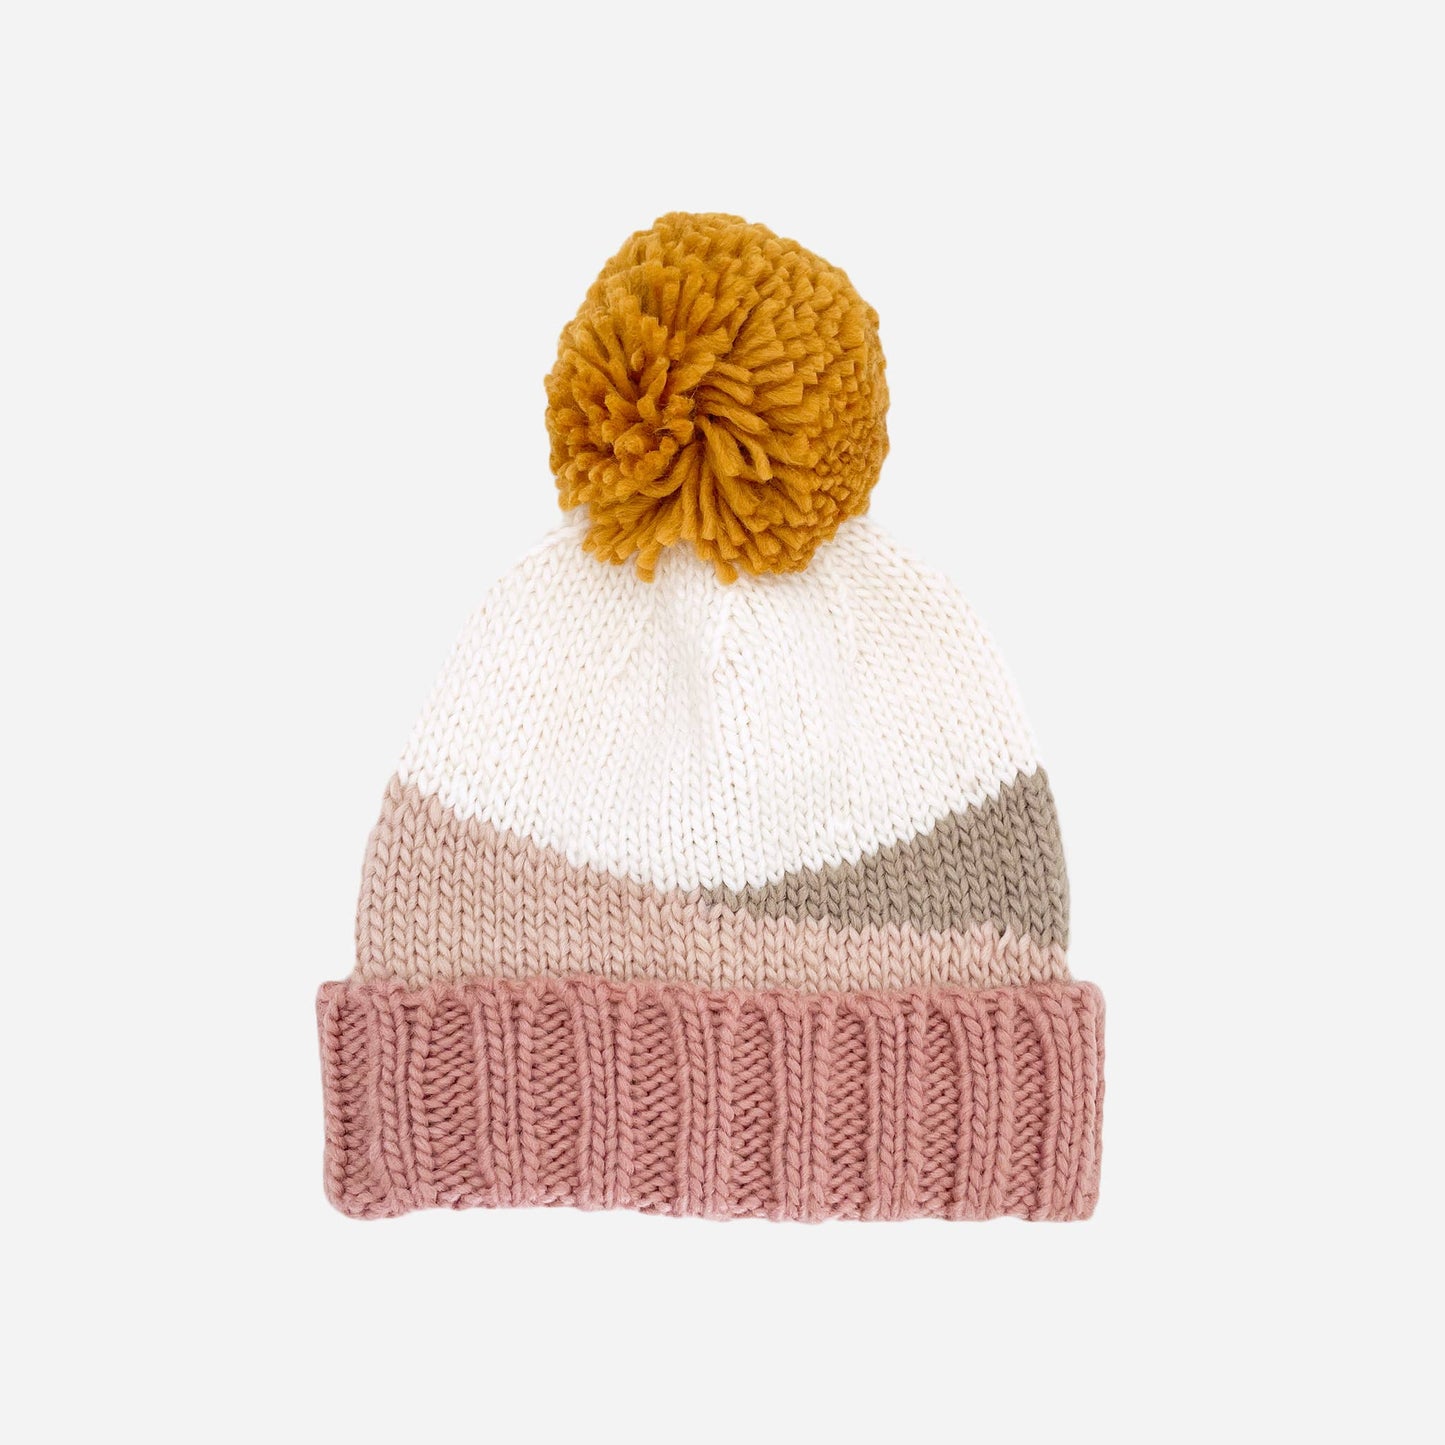 Sunset Hat, Rose | Kids and Baby Hat